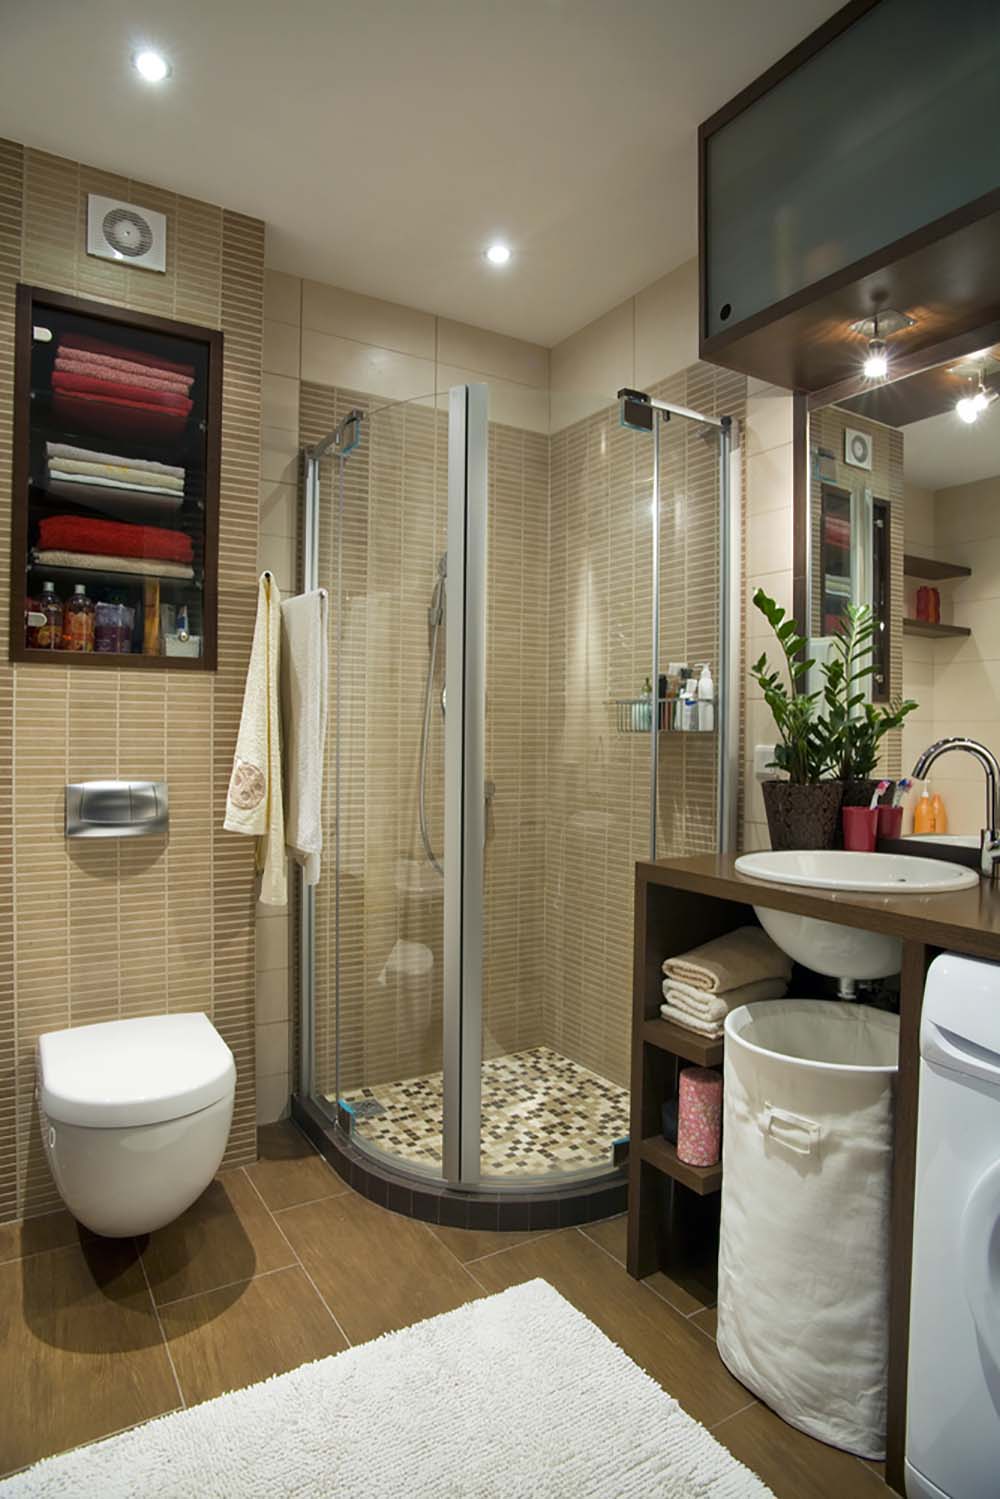 51 Beautiful and Functional Small Bathrooms - Page 3 of 3